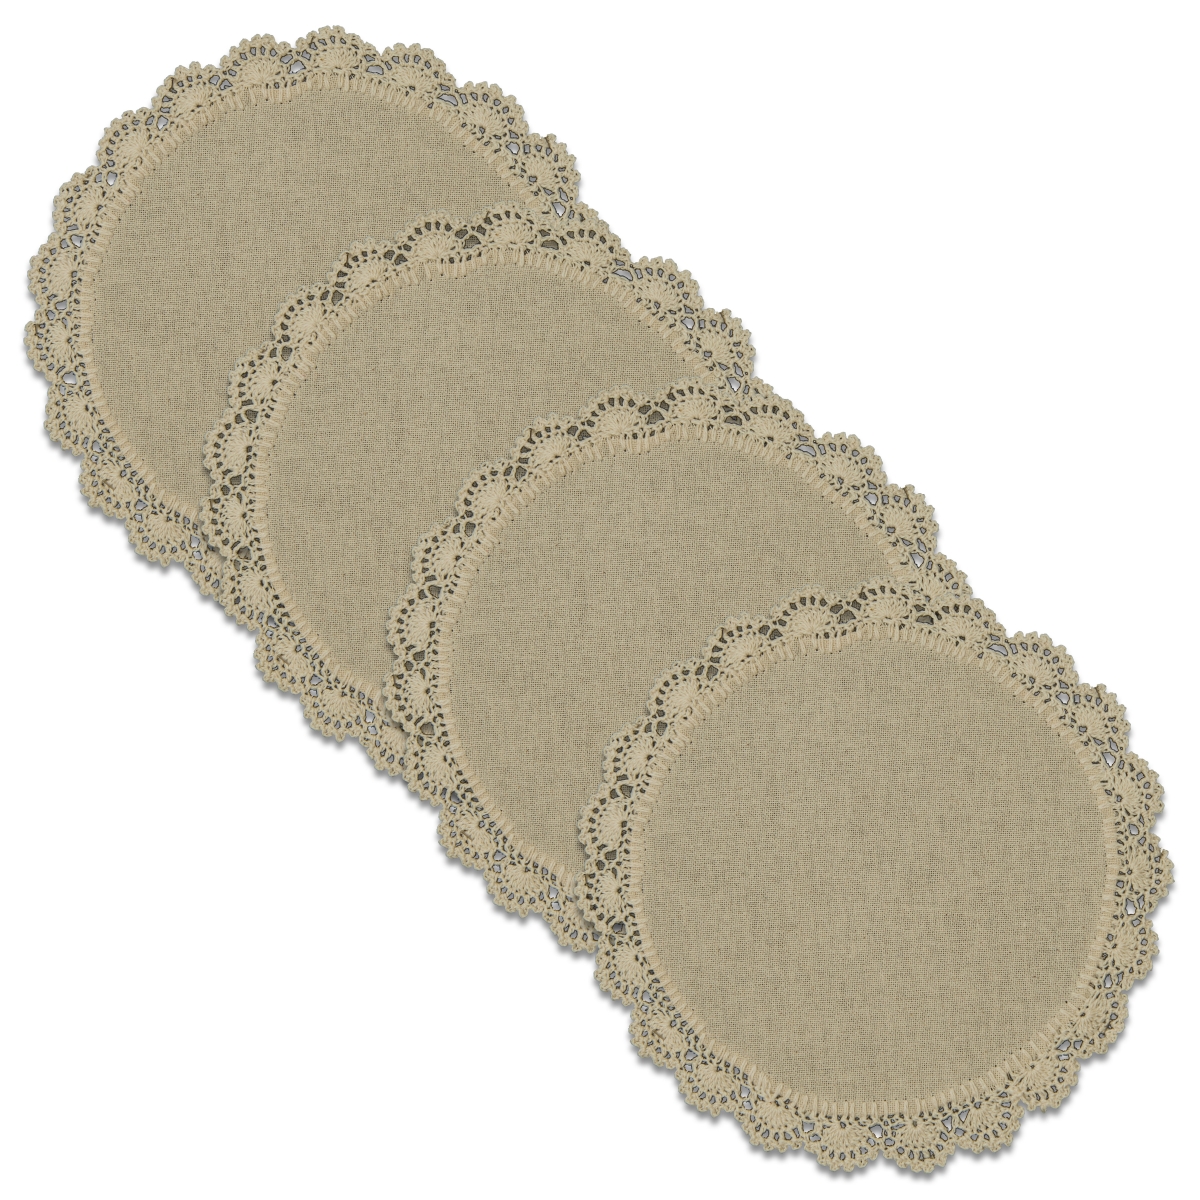 Picture of Heritage Lace CEPE-0800NA-S 8 in. Crochet Envy Petal Edge Round Doily - Natural - Set of 4